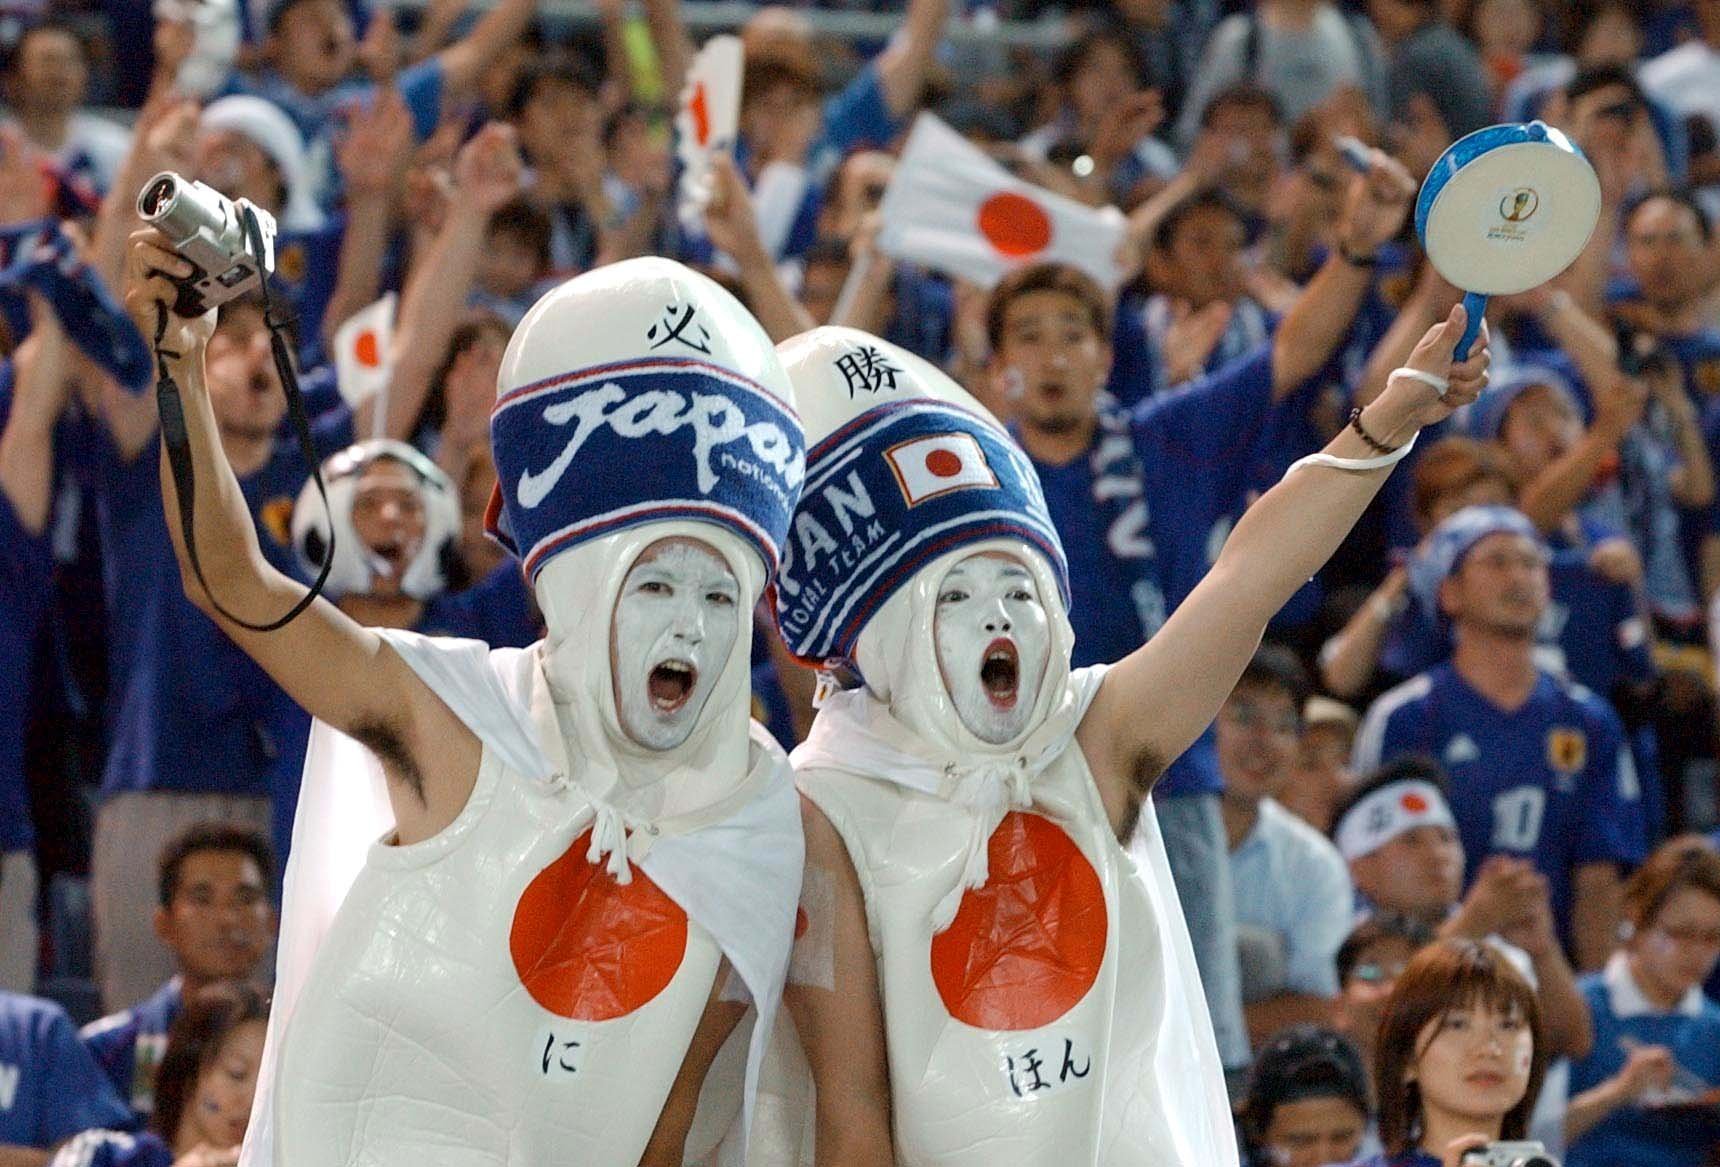 The 2002 FIFA World Cup in Japan and South Korea – the best tournament ever?